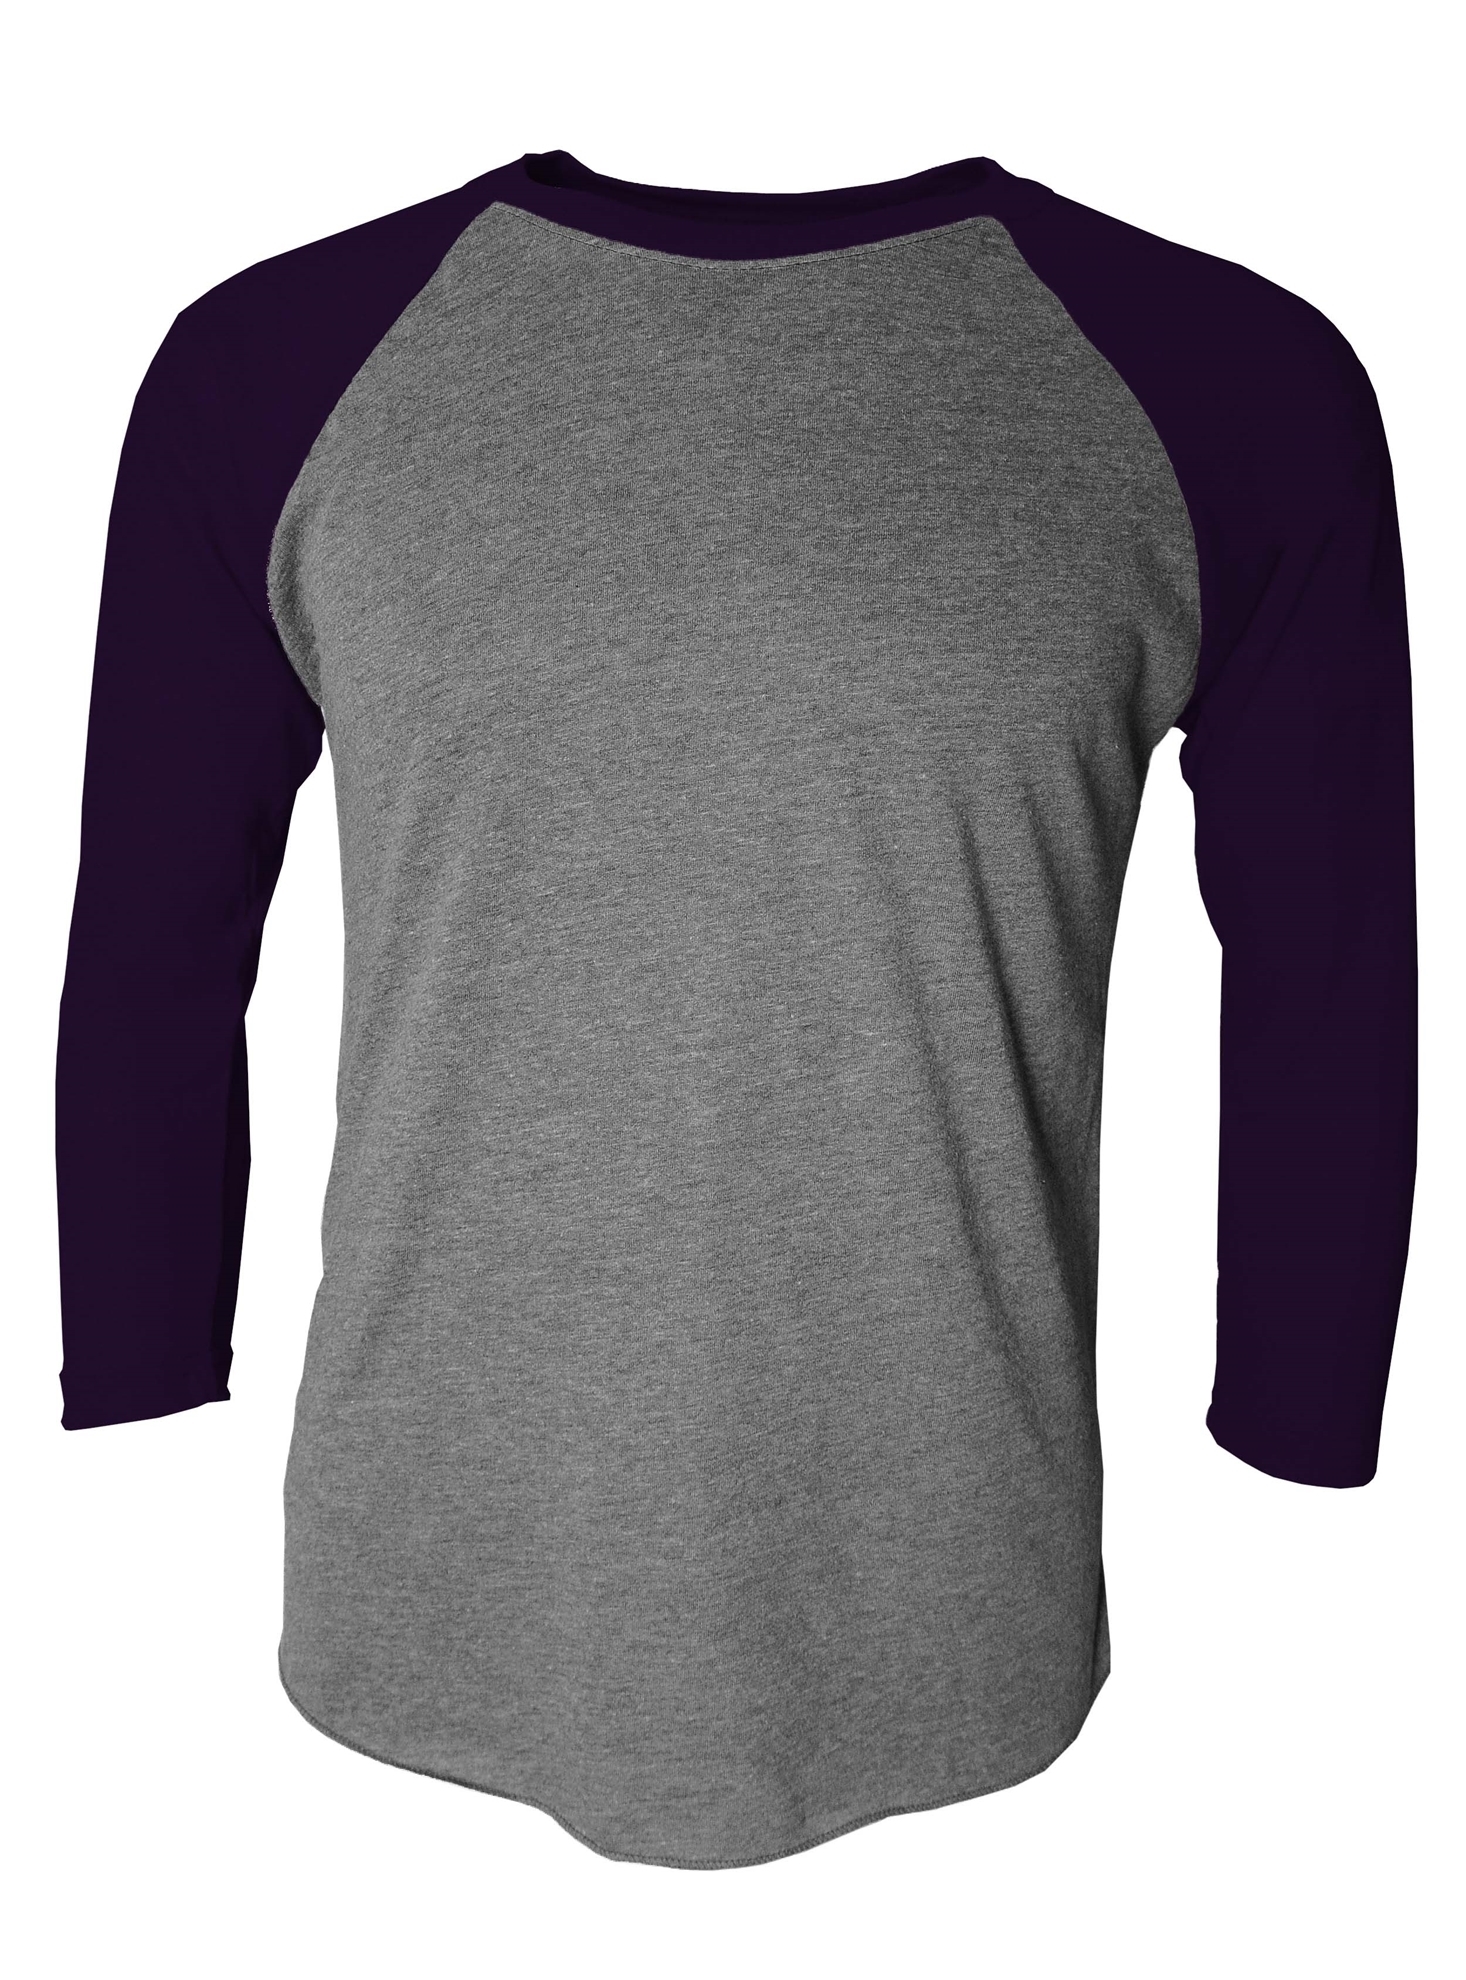 click to view SPORTS GREY/PURPLE